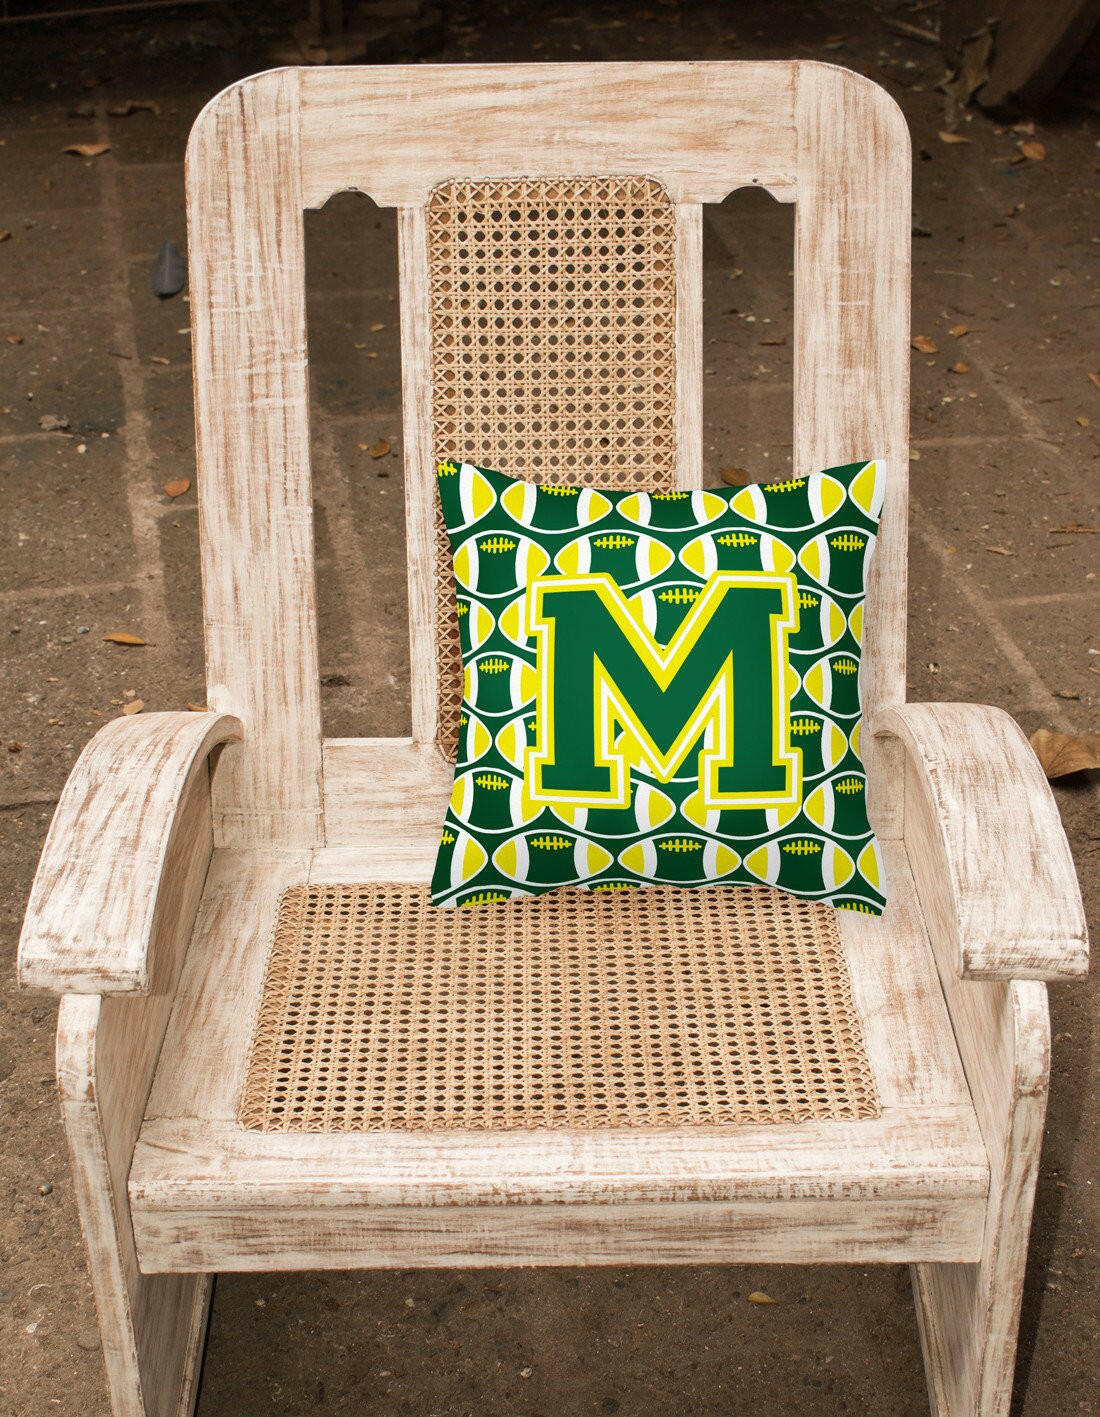 Letter M Football Green and Yellow Fabric Decorative Pillow CJ1075-MPW1414 by Caroline's Treasures